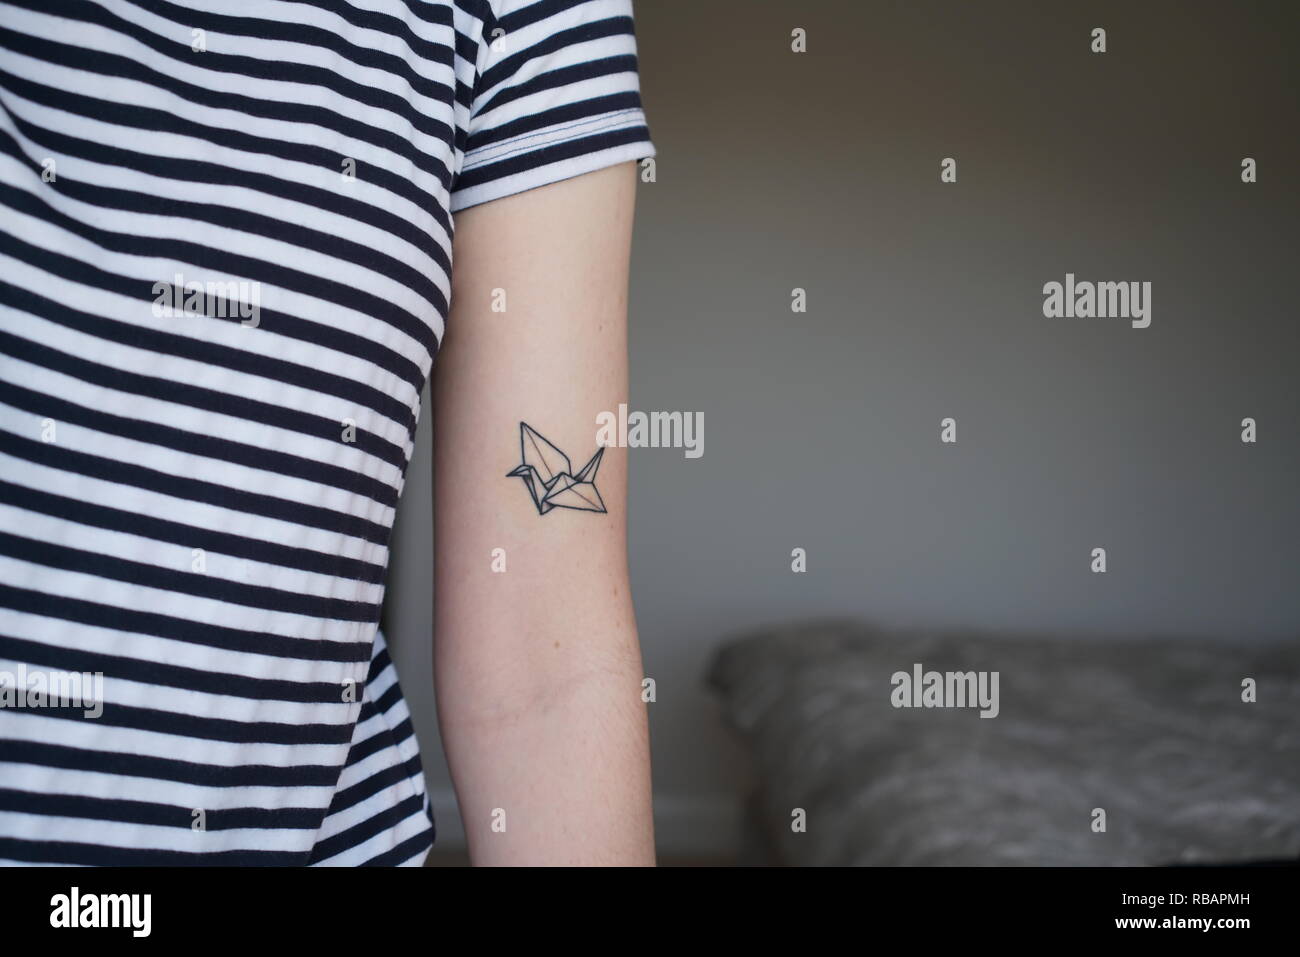 105 Minimalist Tattoos That Are Aesthetically Pleasing To The Eye  Bored  Panda